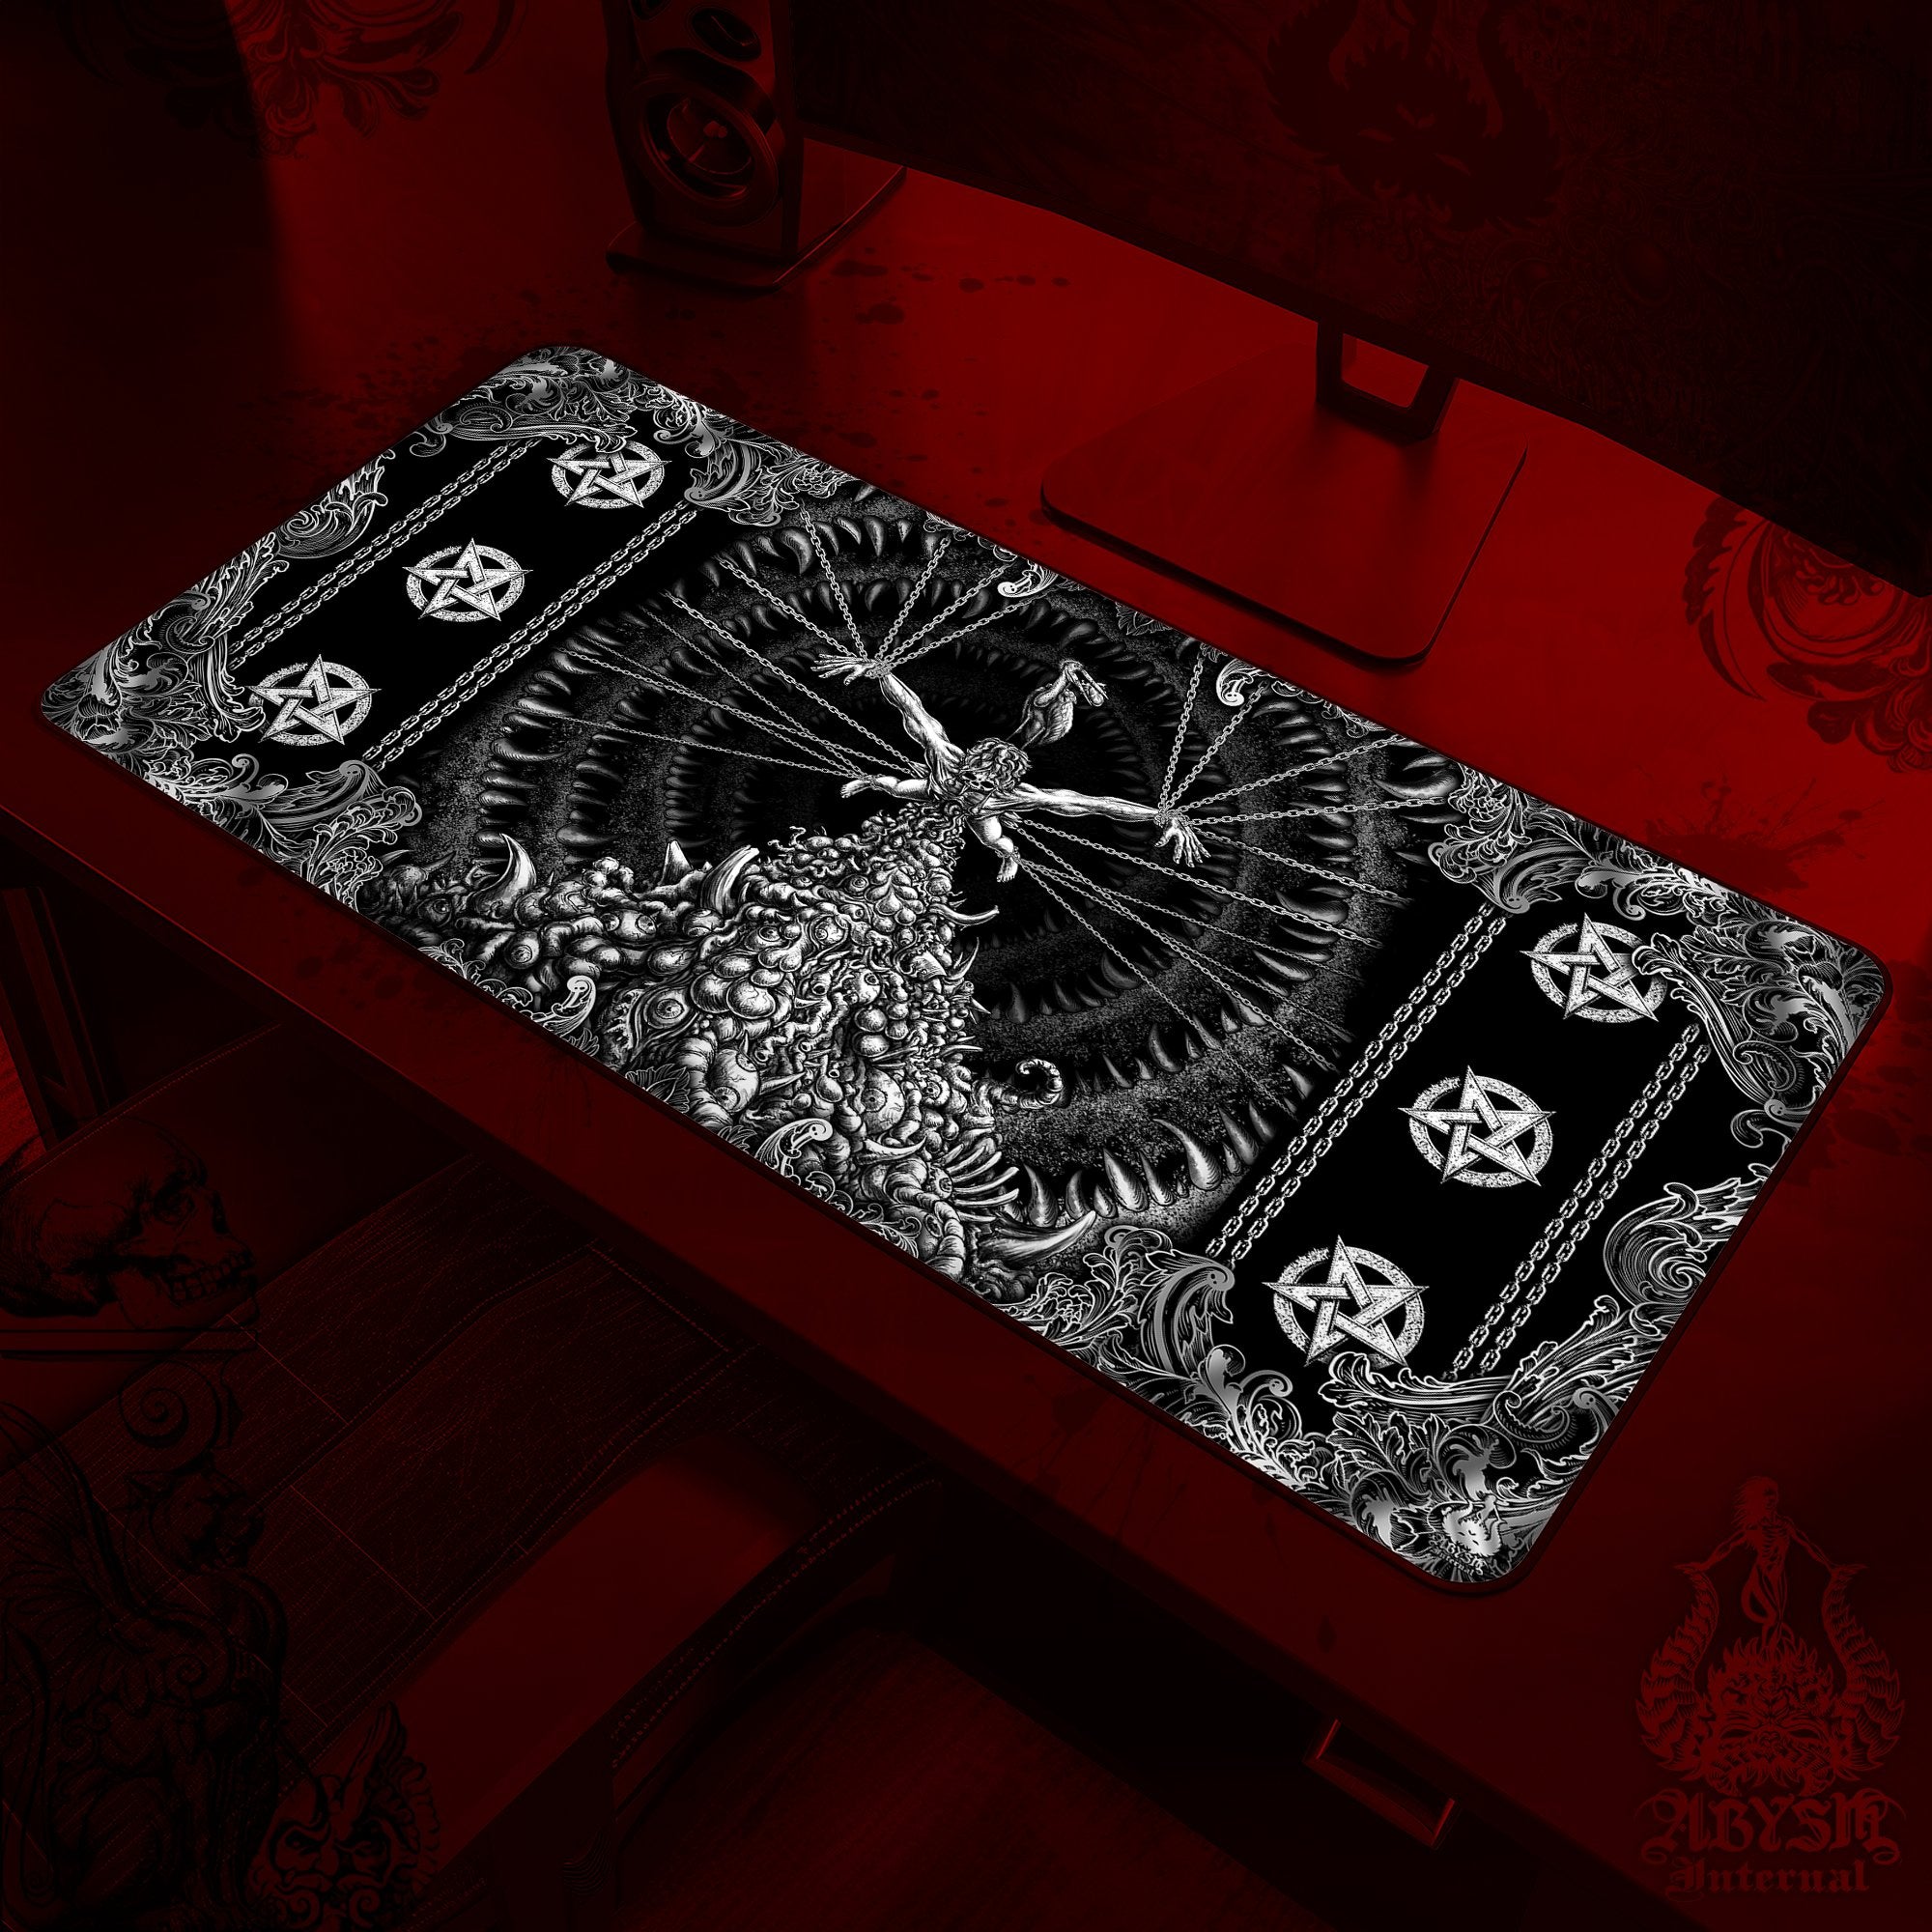 Horror Desk Mat, Goth Hell Gaming Mouse Pad, Gothic Table Protector Cover, Gore and Blood Workpad, Dark Fantasy Art Print - Pentagrams, Purging - Abysm Internal